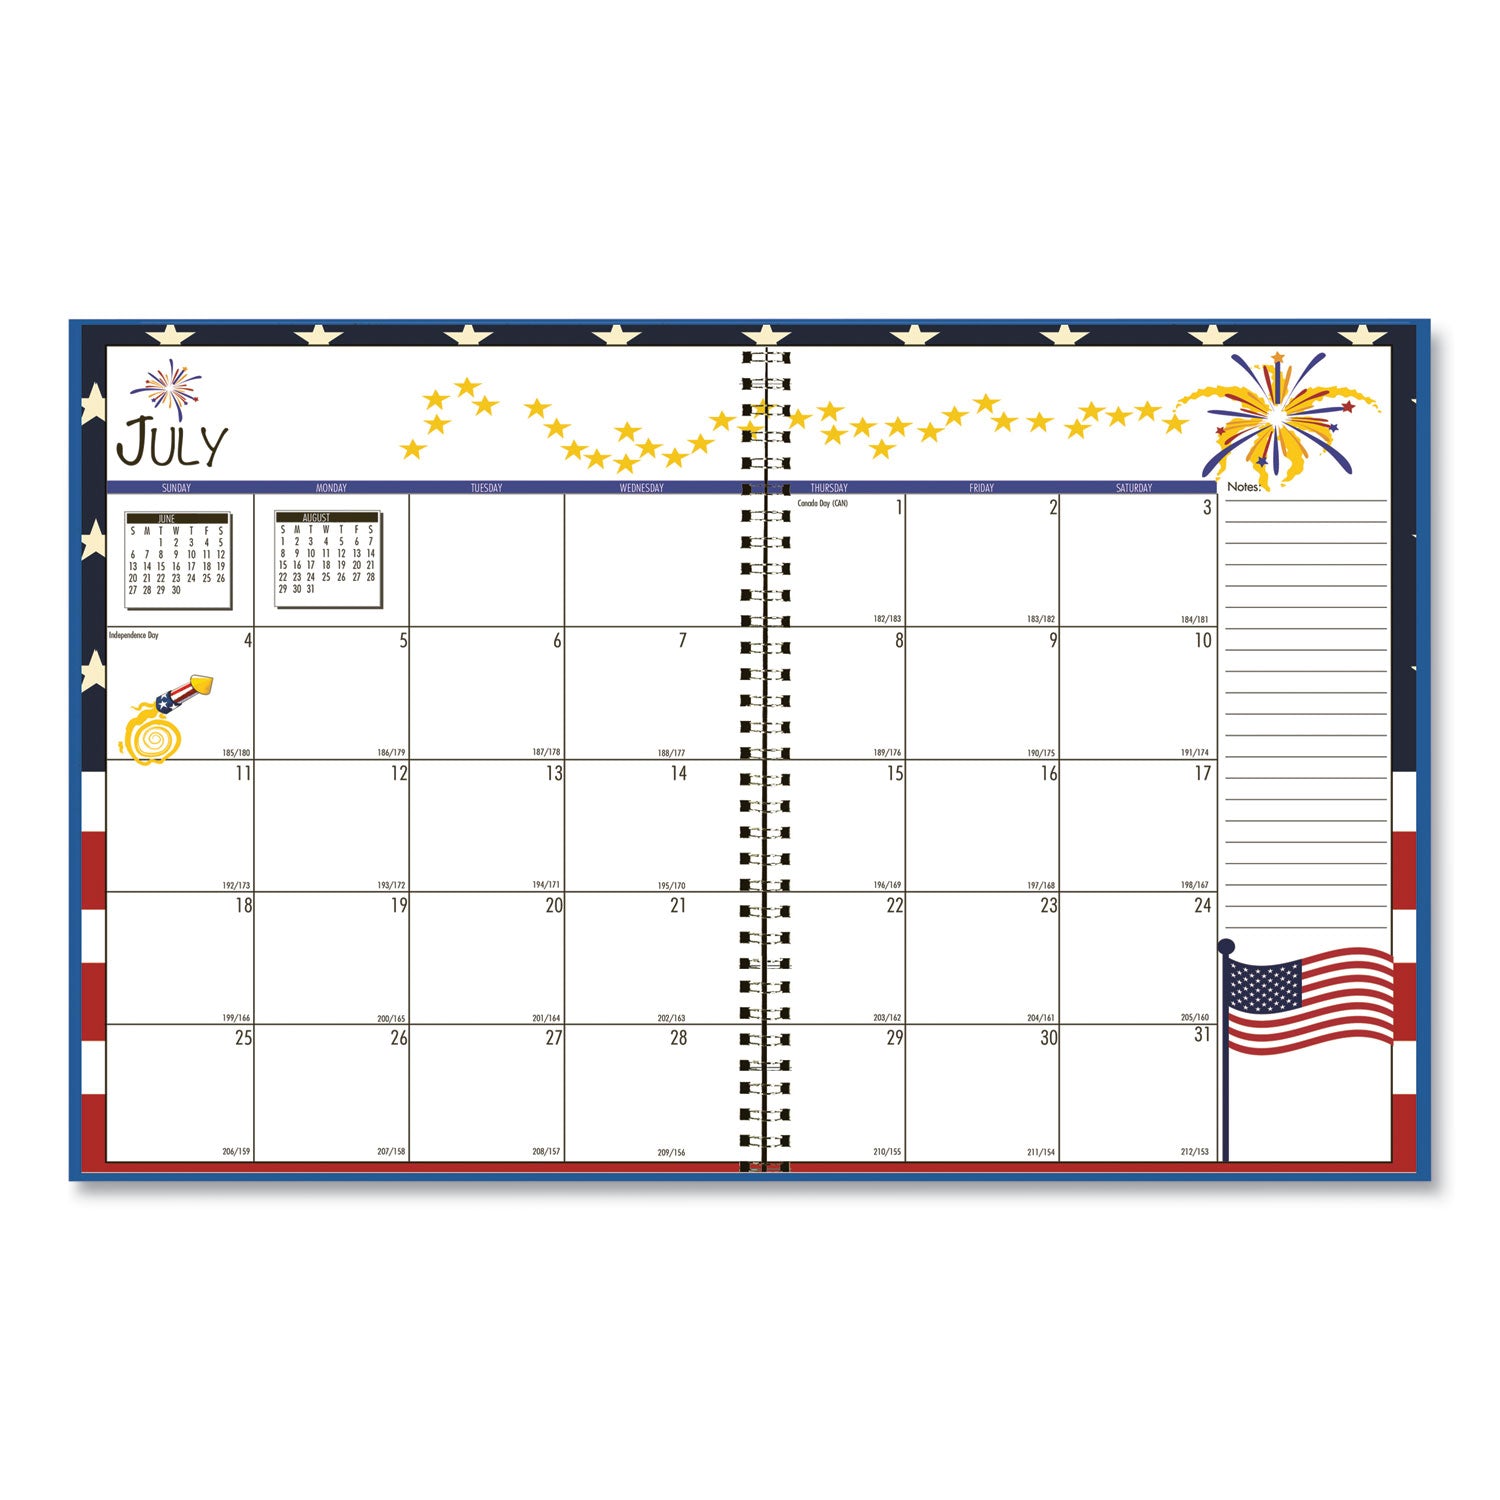 seasonal-monthly-planner-seasonal-artwork-10-x-7-light-blue-cover-12-month-july-to-june-2022-to-2023_hod239508 - 2